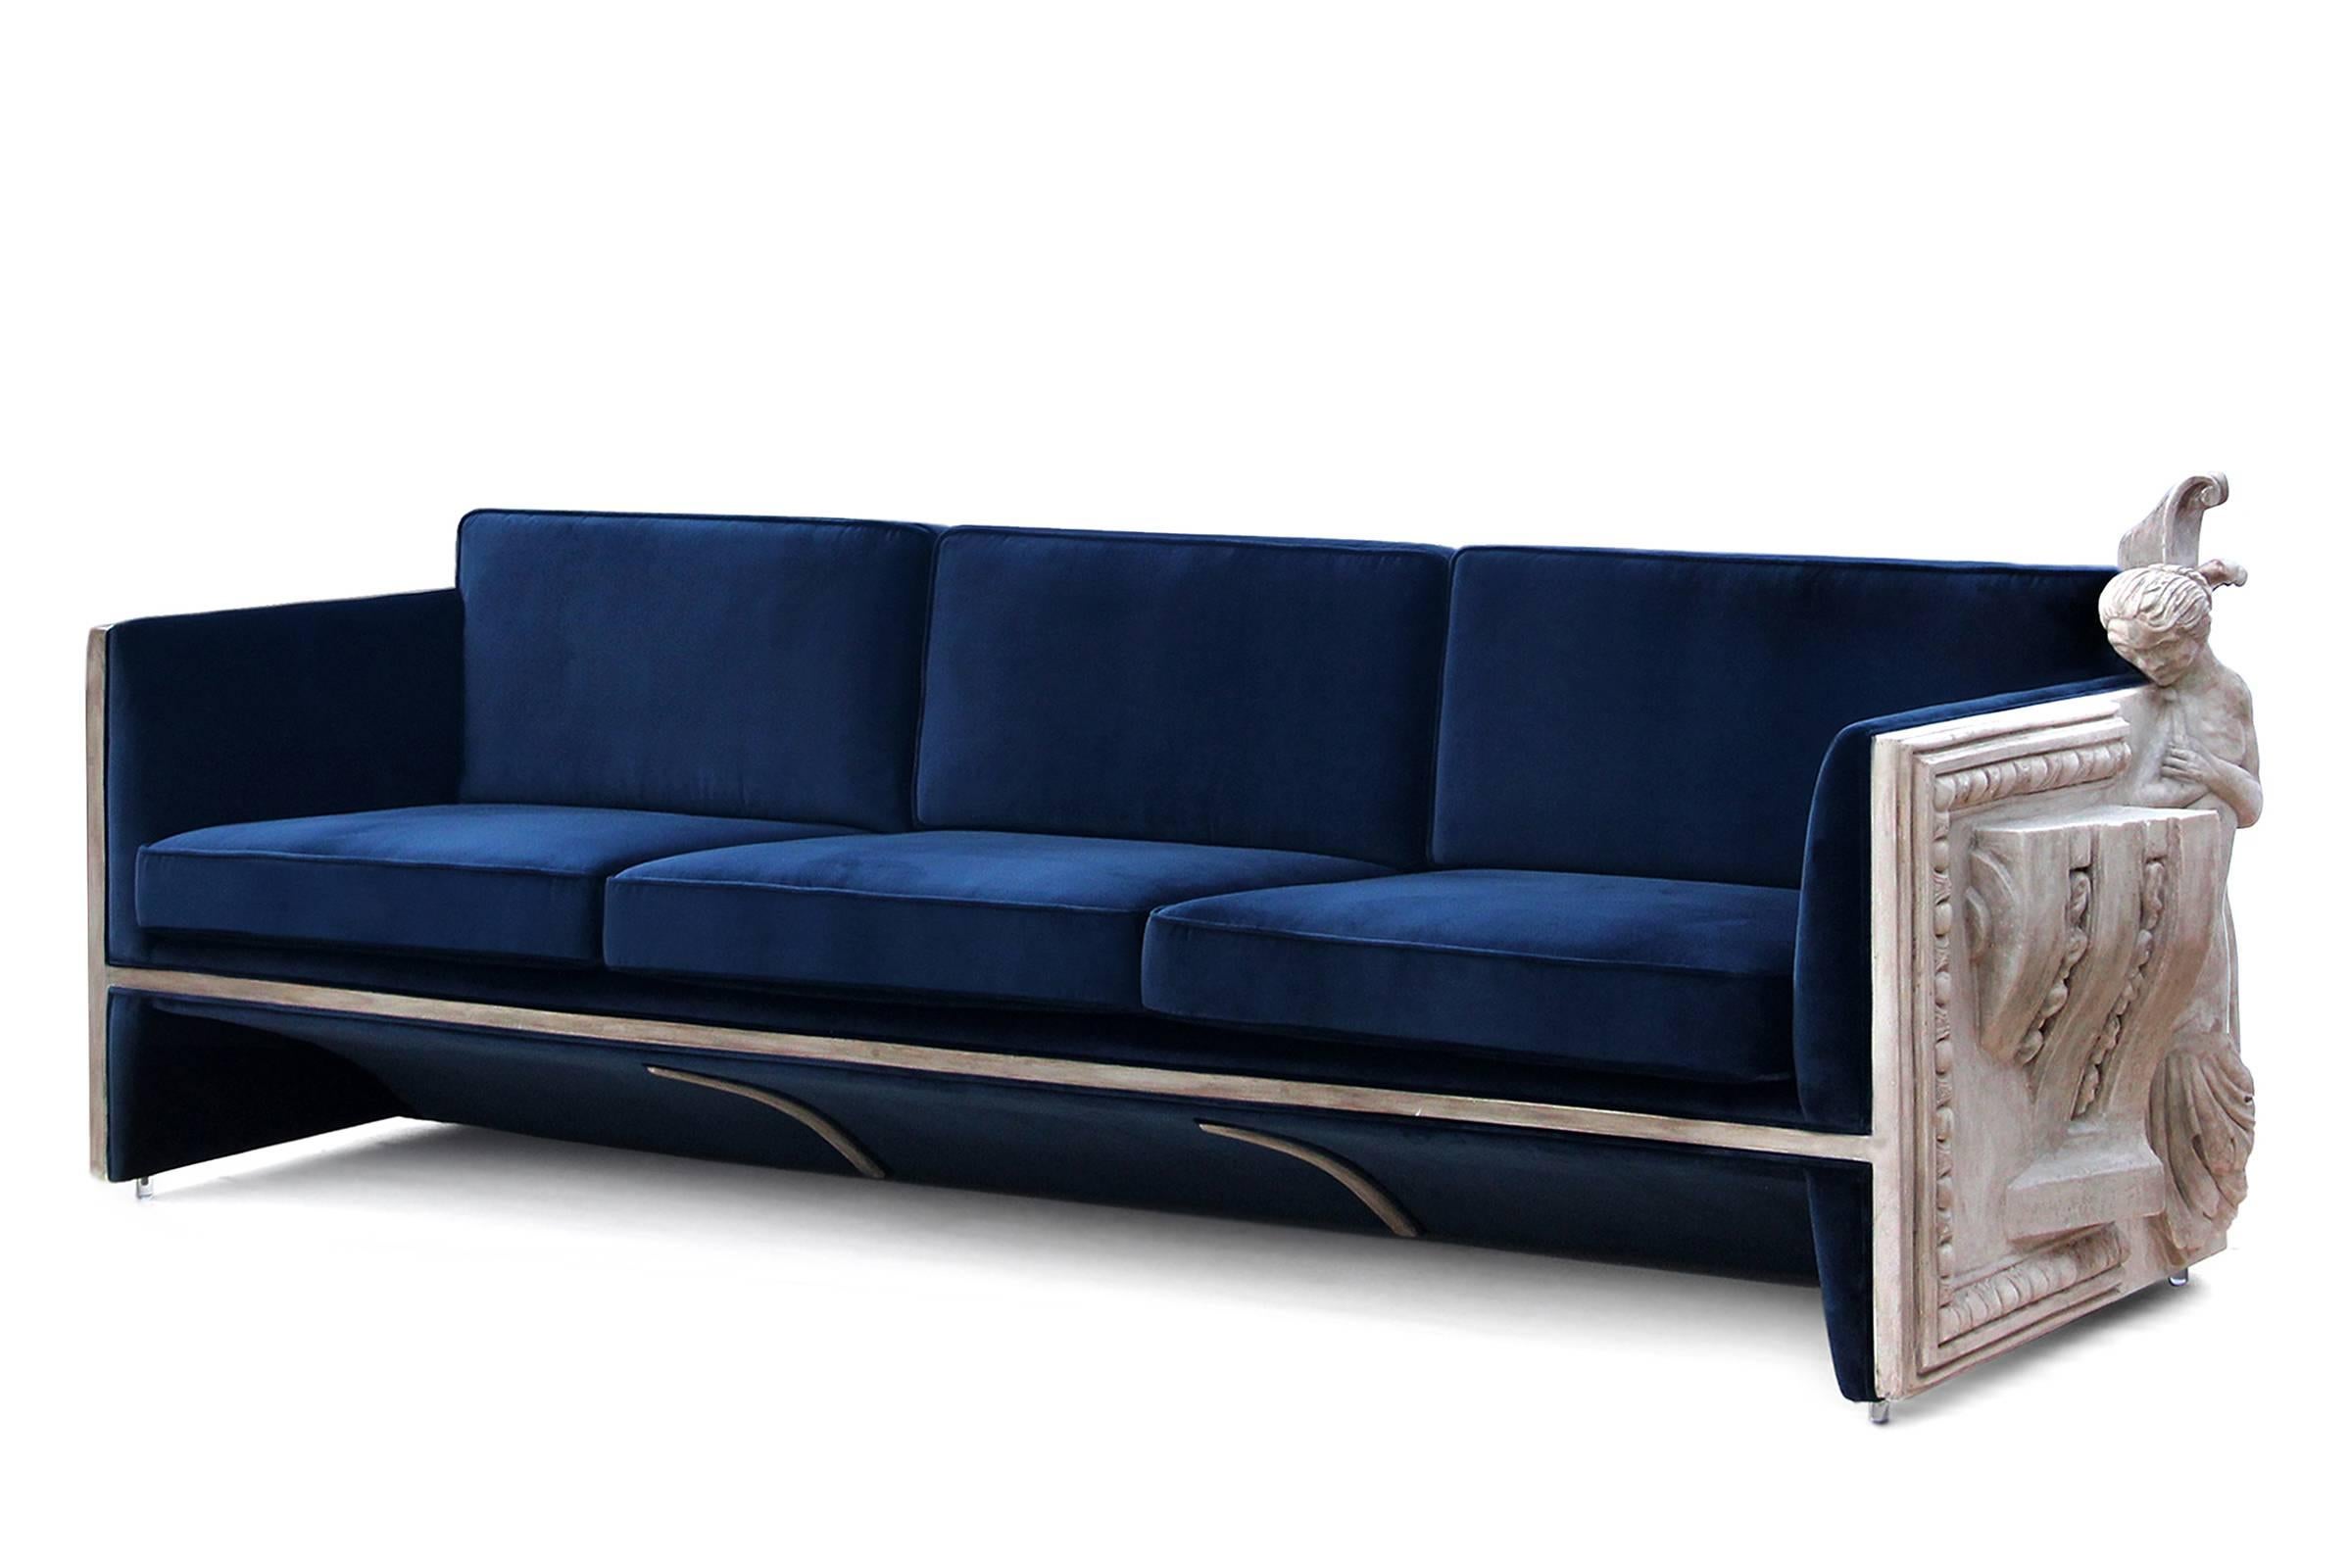 Sofa French castle wooden structure and sculpted panels,
in a manual sculpture, produced in resin and finished with restoration techniques similar to stone. Dark blue fabric finish. Exceptional piece.
